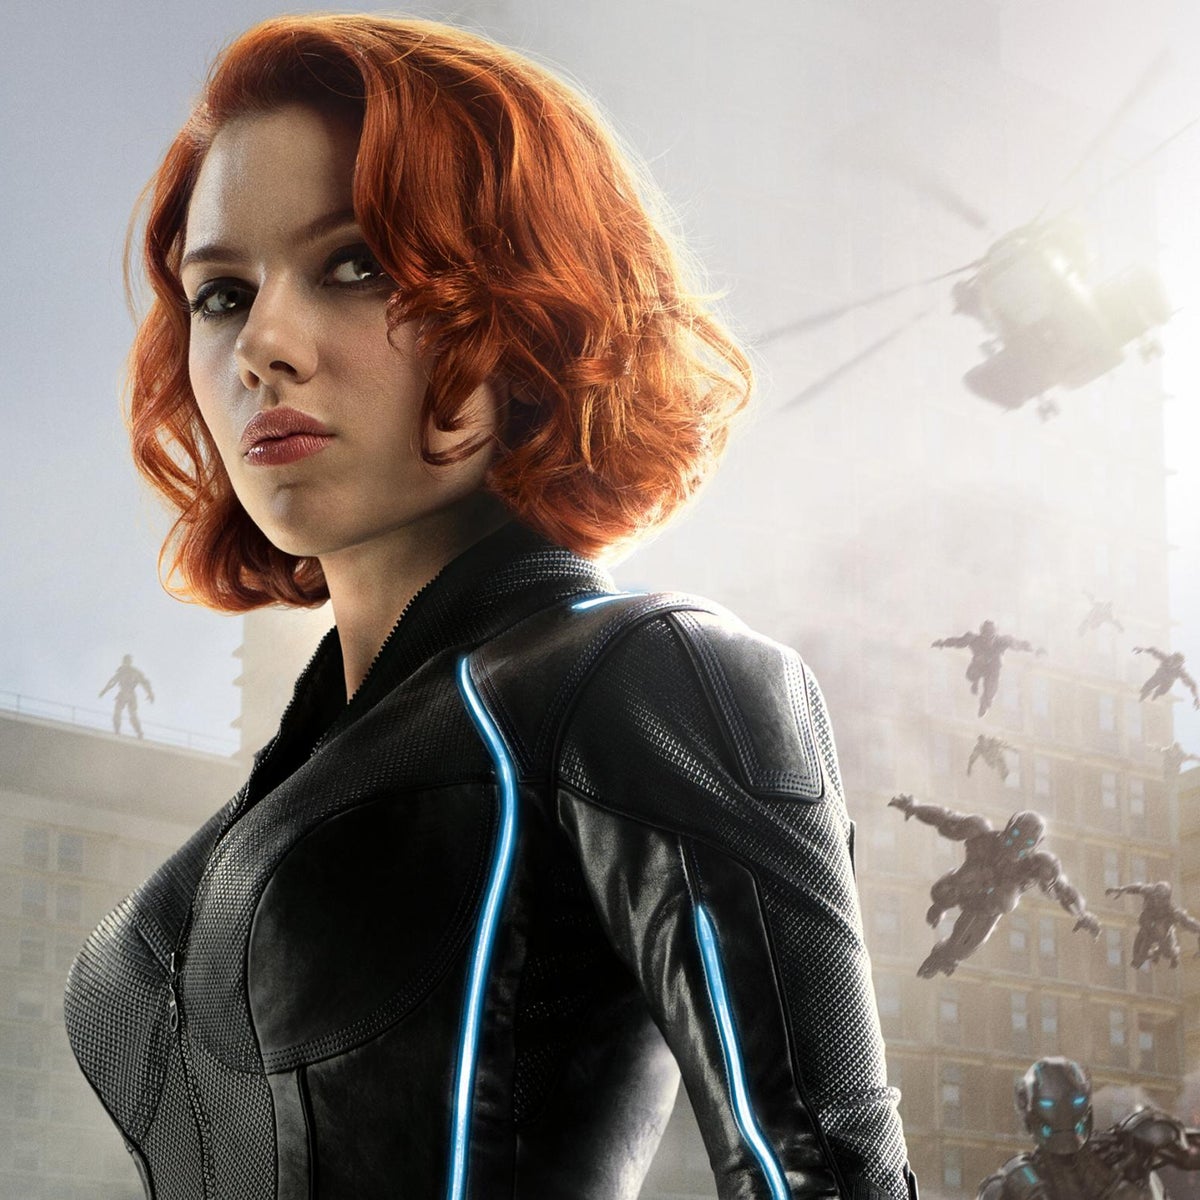 Captain America actor Chris Evans may have confirmed a Black Widow